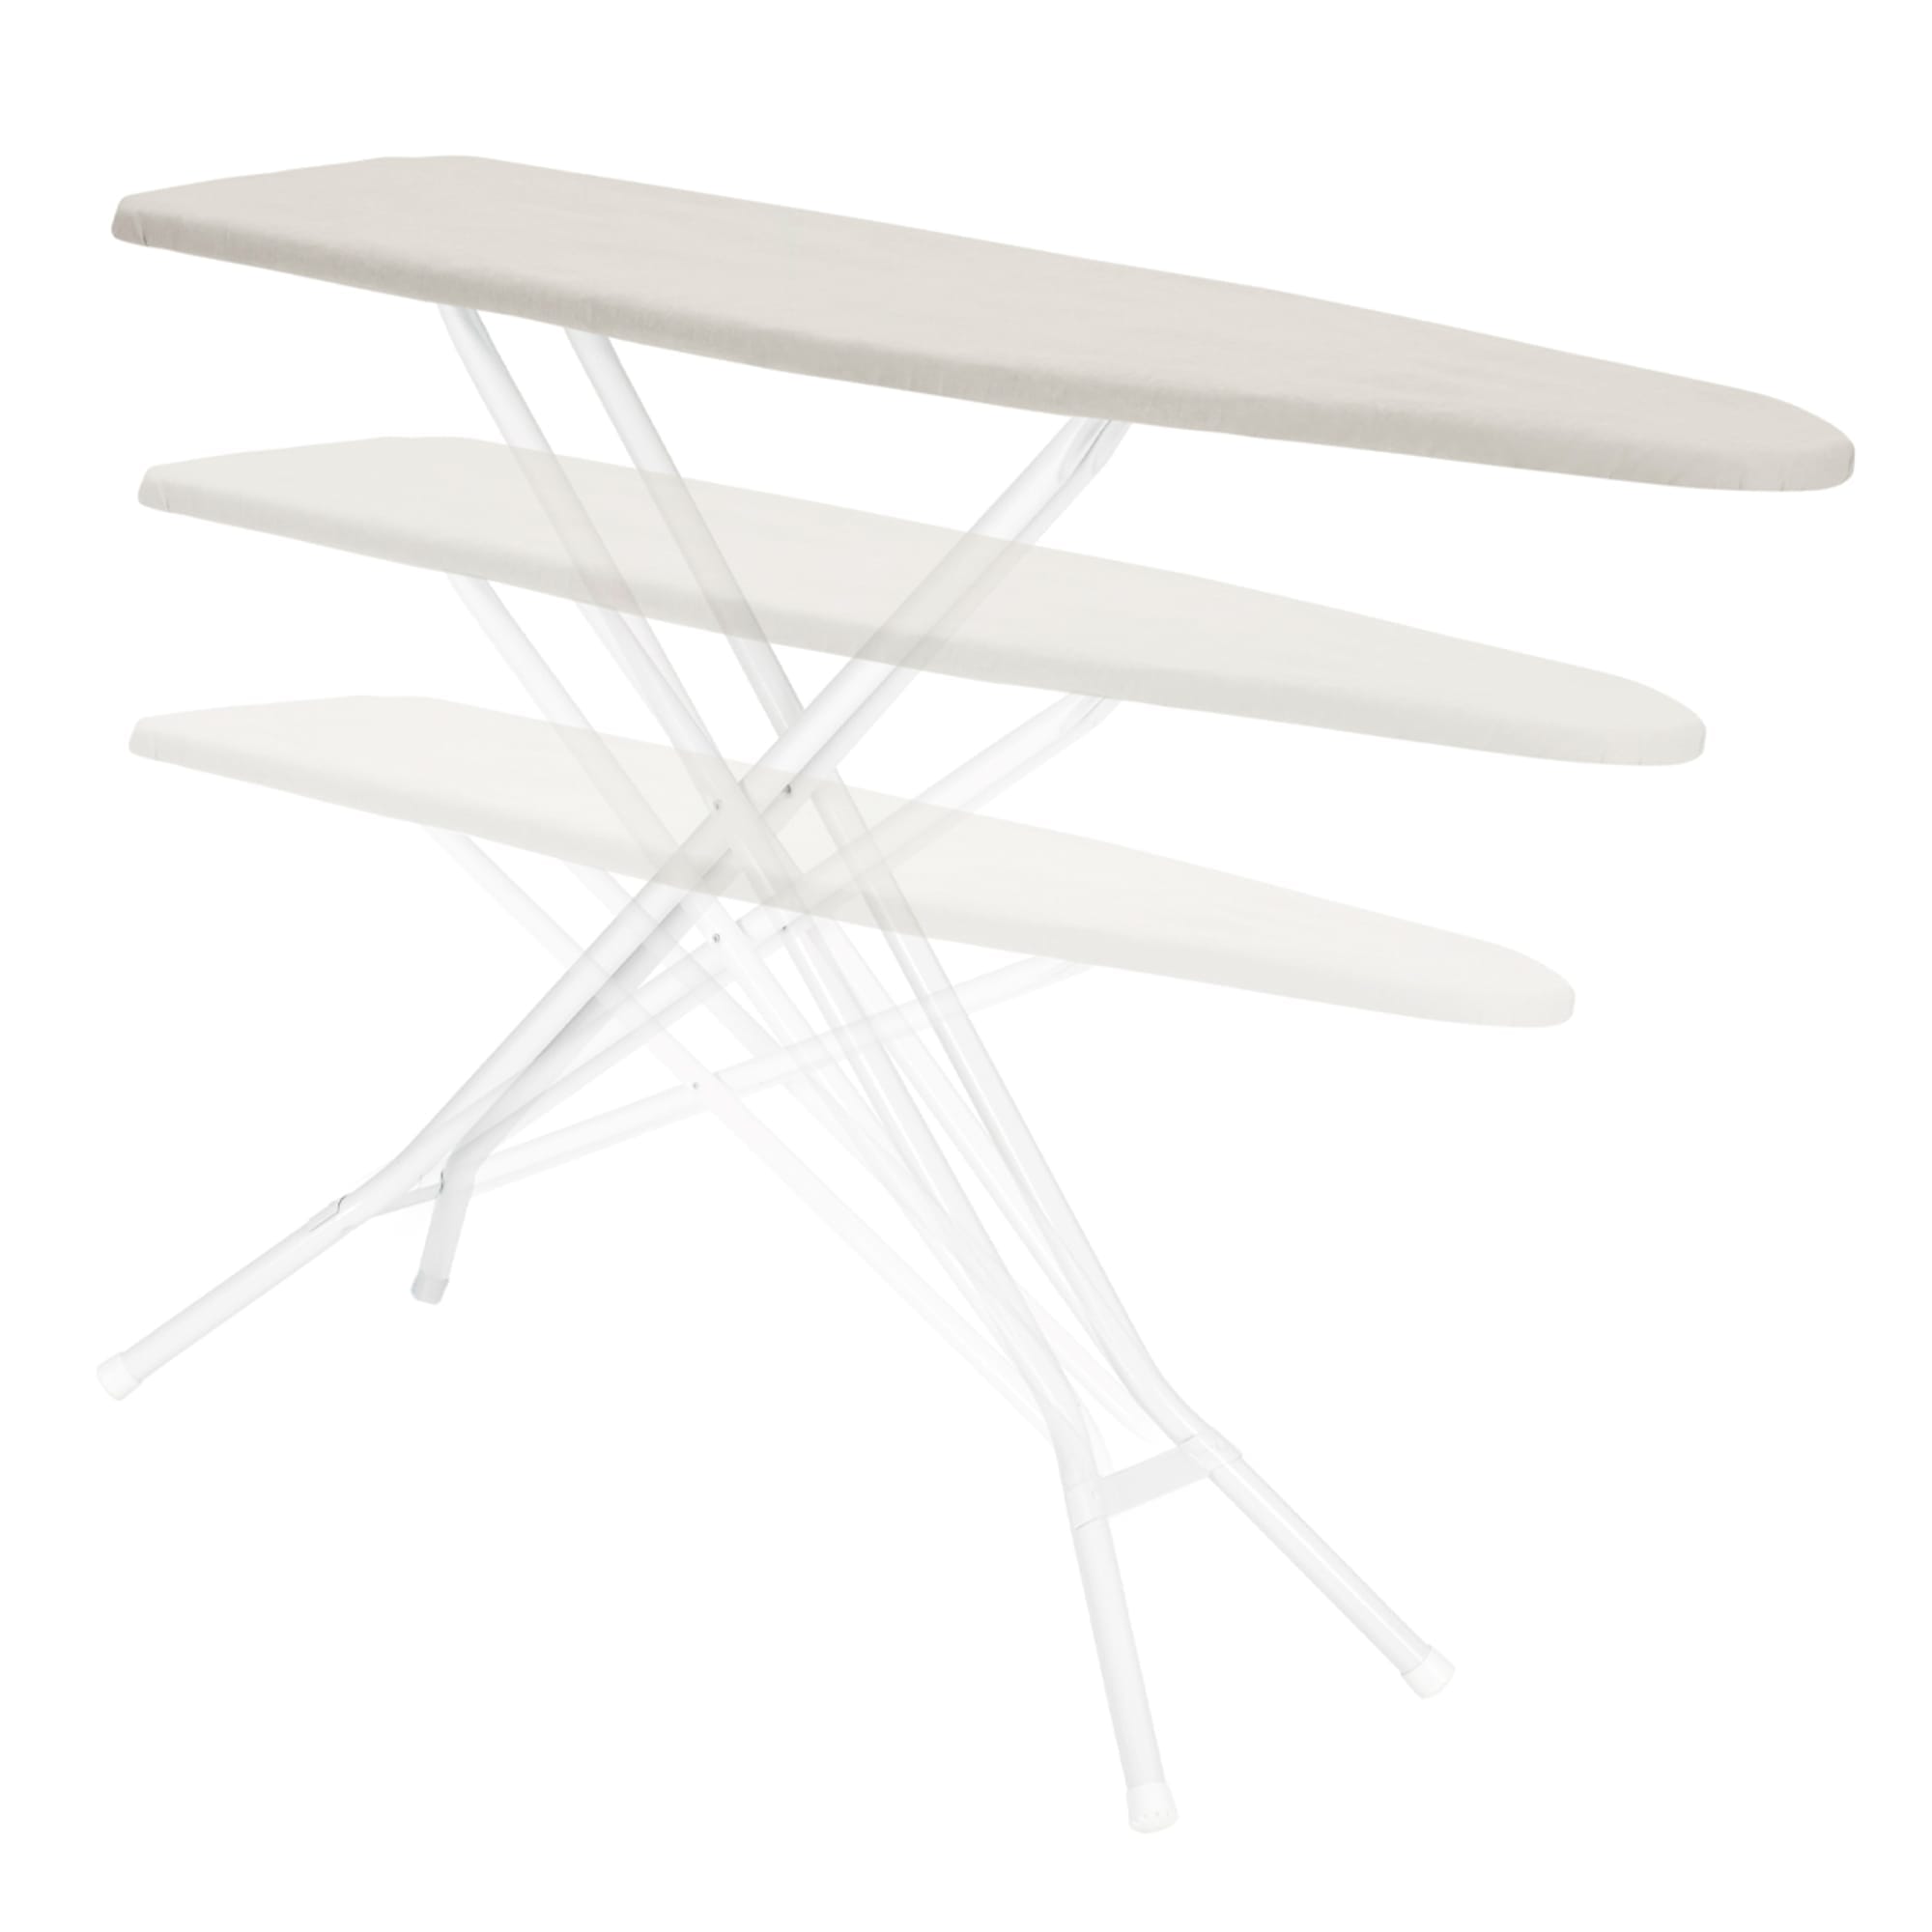 Seymour Home Products Adjustable Height, 4-Leg Ironing Board With Perforated Top, Beige (4 Pack) $30.00 EACH, CASE PACK OF 4